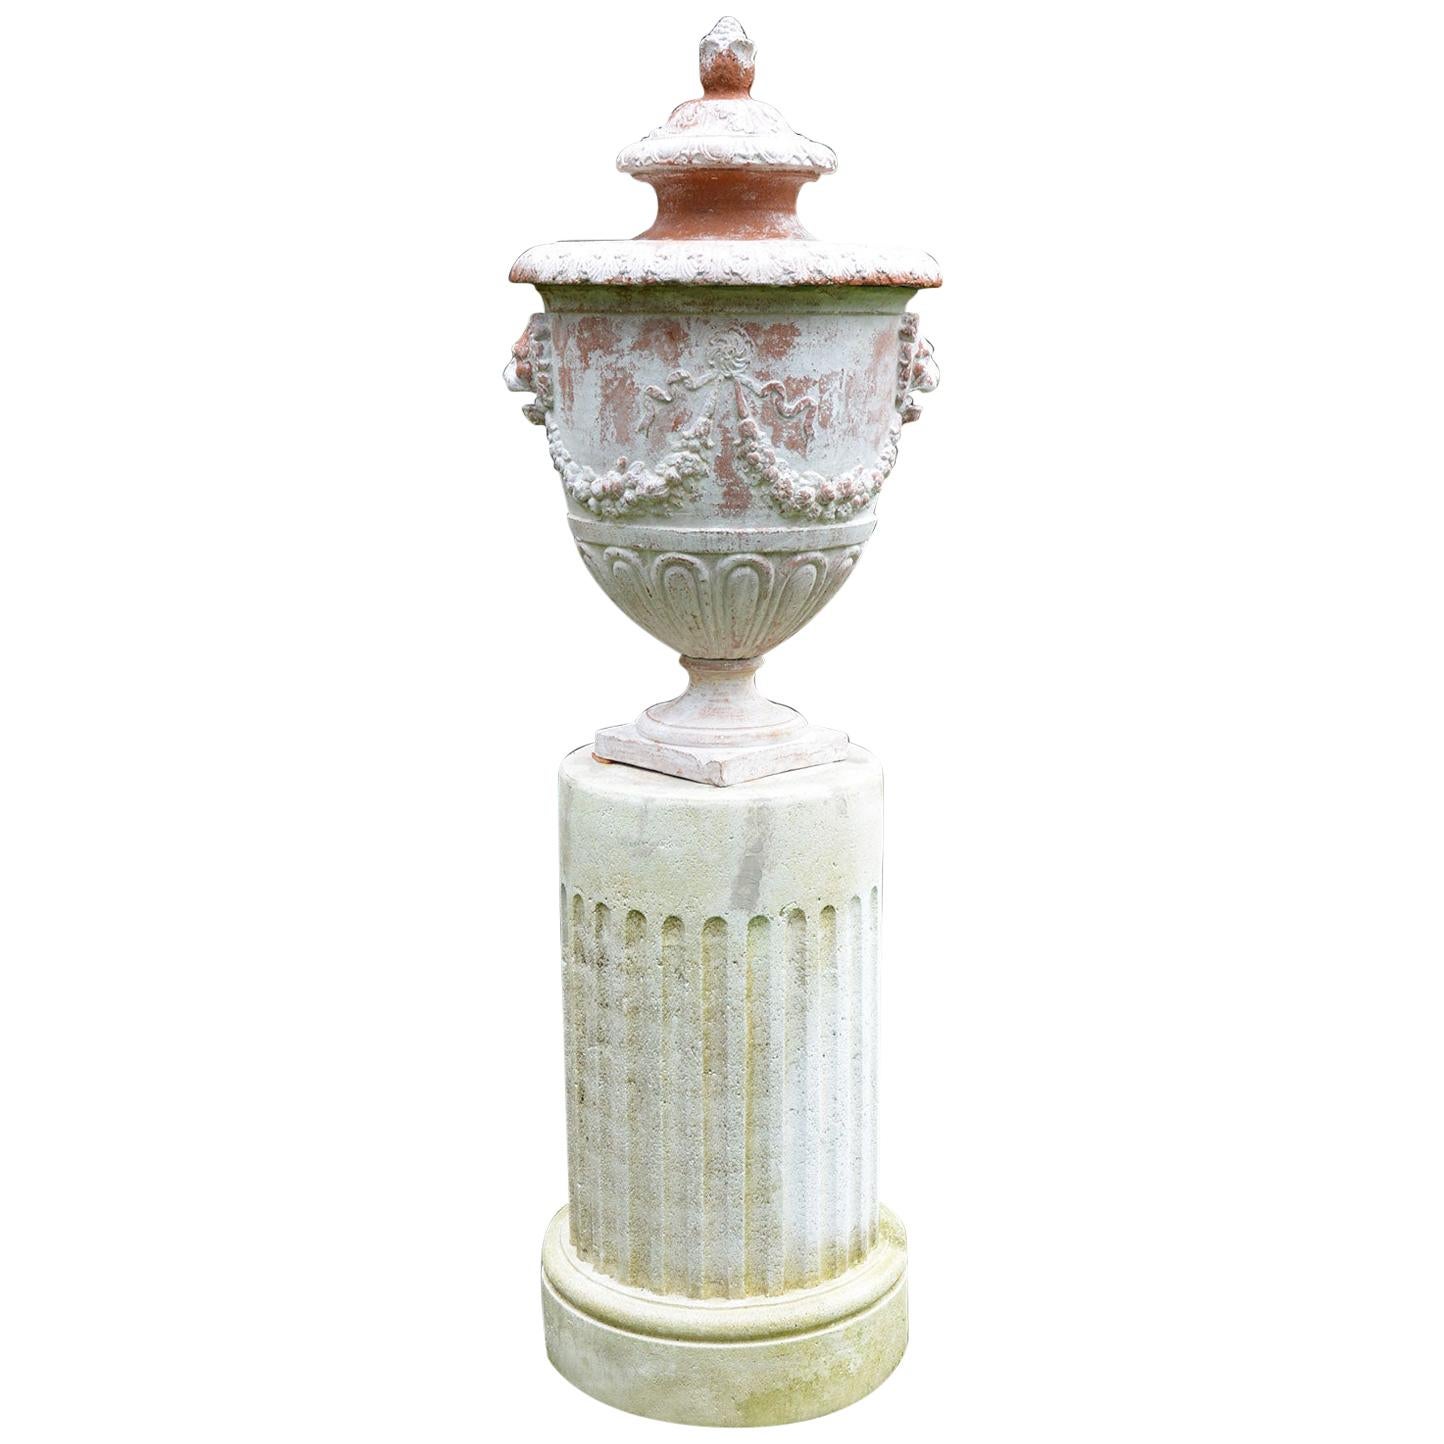 White Painted Terra-cotta Urn with Lid on White Stone Pedestal